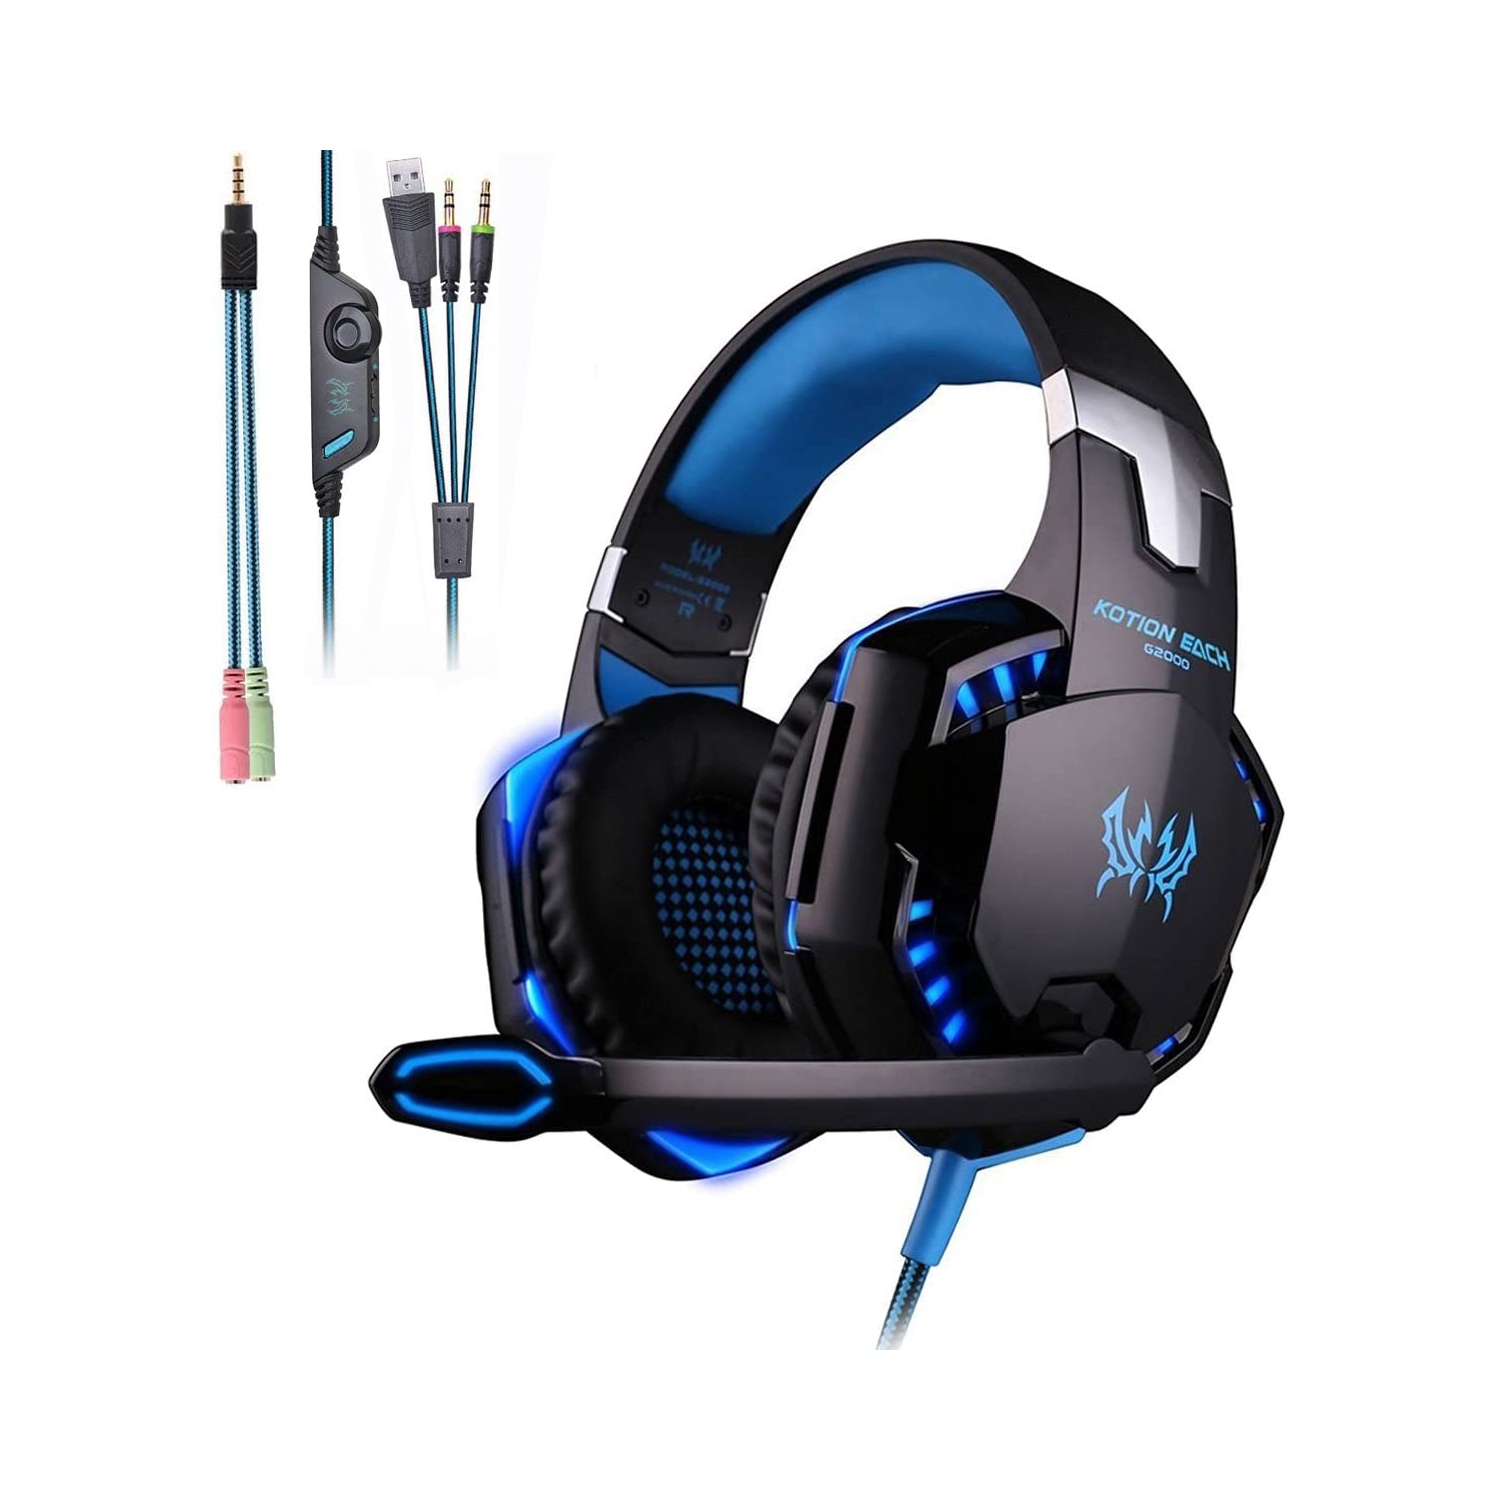 Mengshen Gaming Headset - with Mic, Volume Control and Cool LED Lights - Compatible with PC, Laptop, Smartphone, PS4 and Xbox One Controller, G2000 Blue